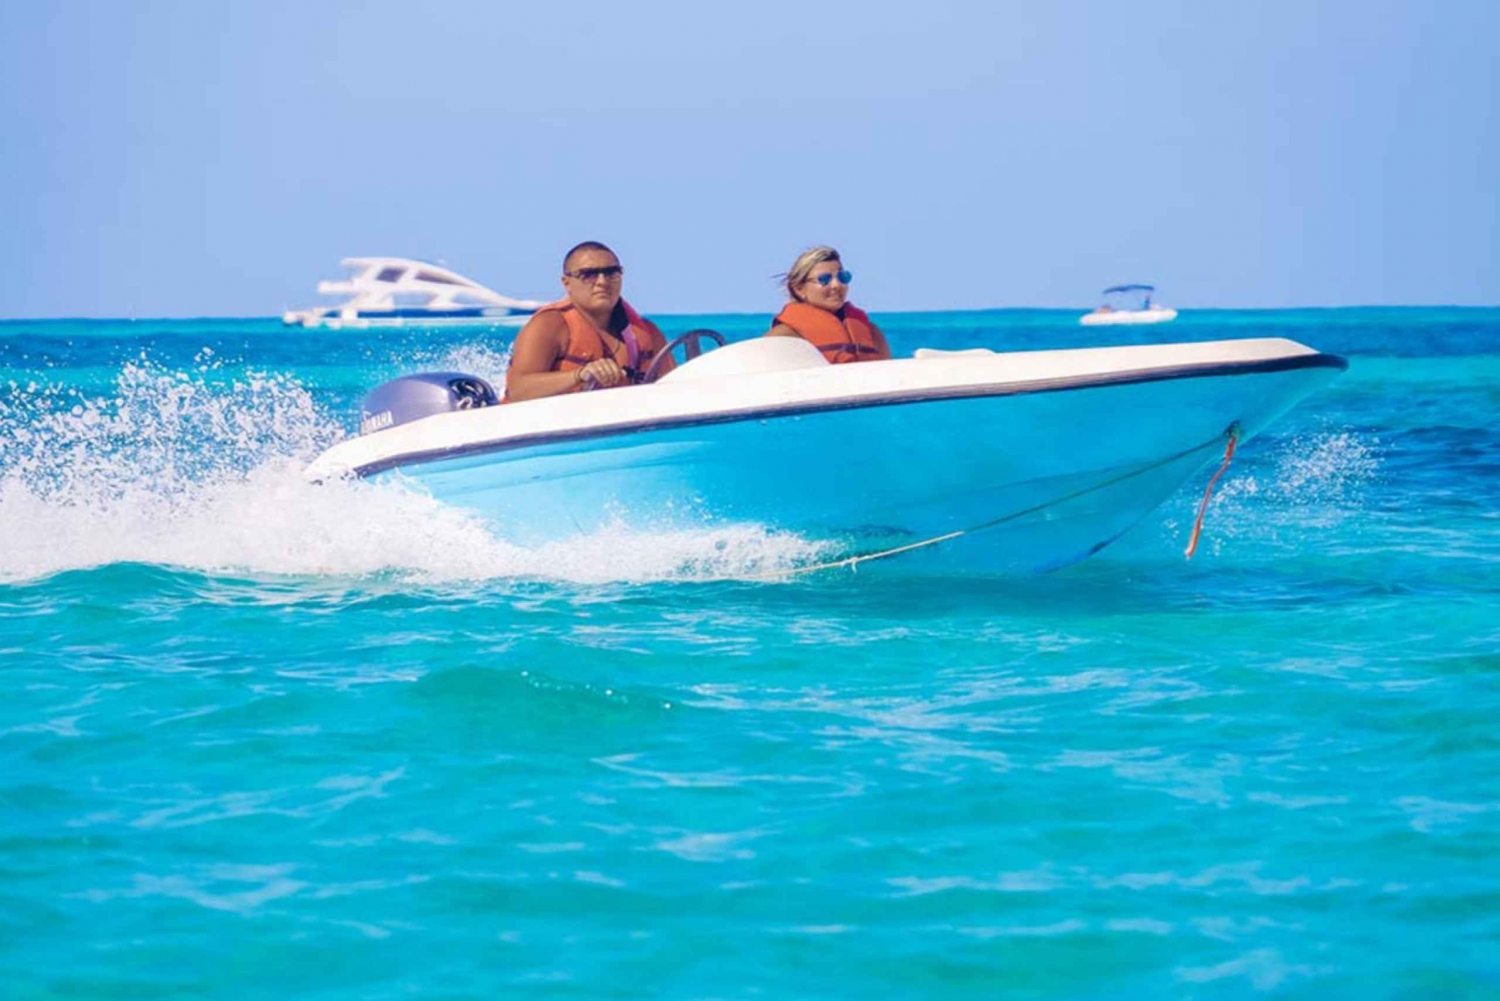 Private Speedboat Experience in Punta Cana with Snorkelling